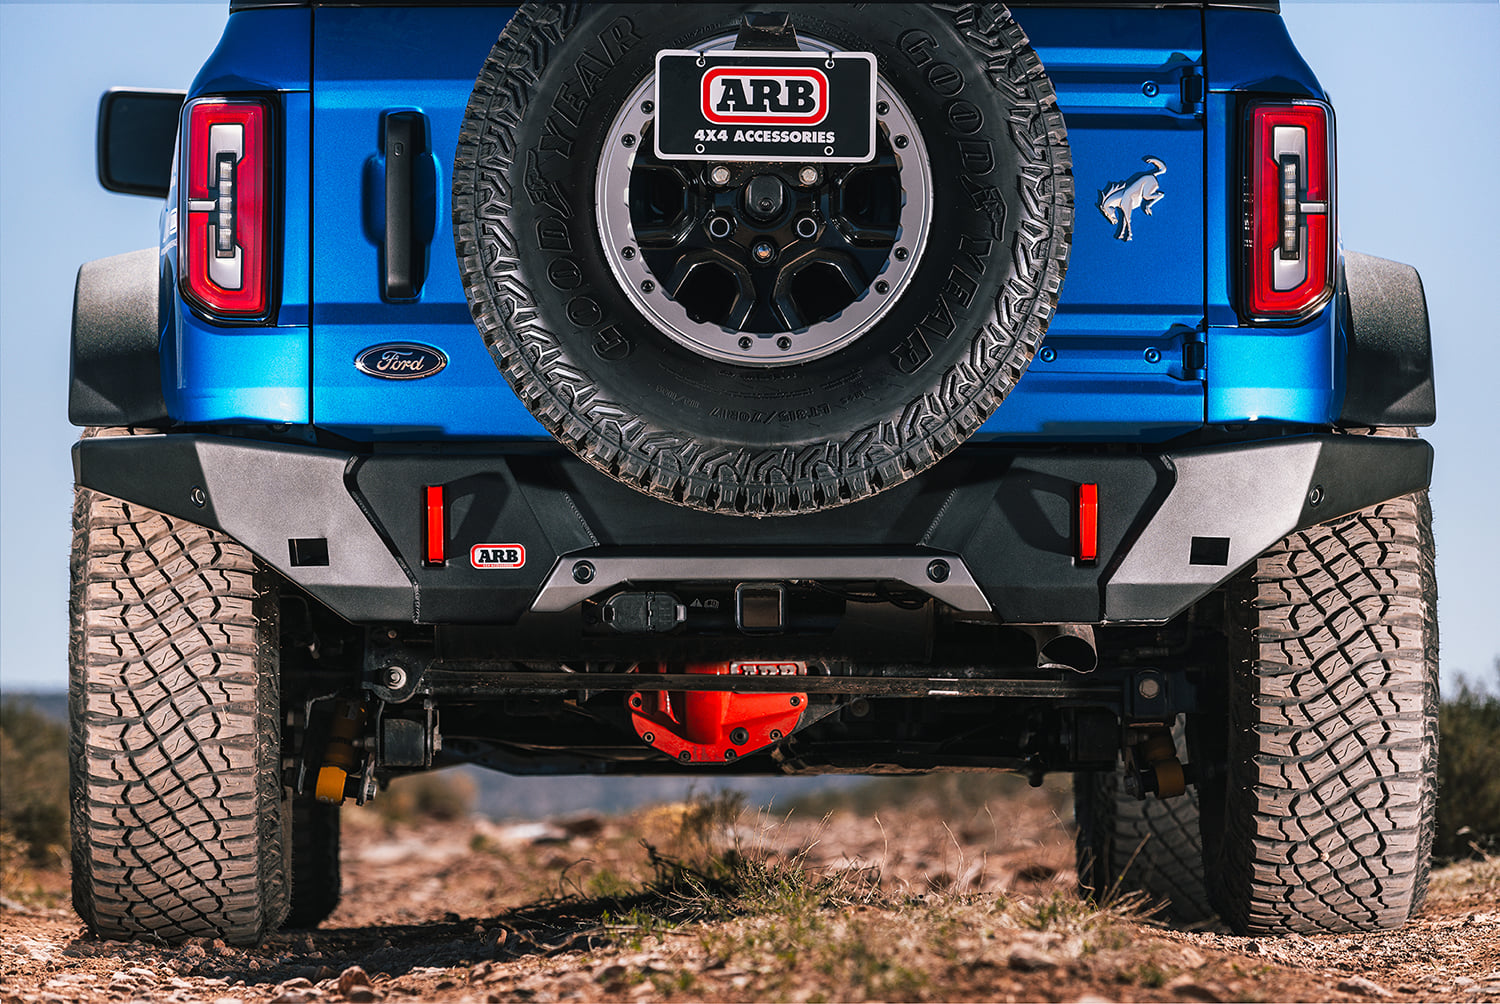 Ford Bronco ARB releases pricing for front / rear bumpers and frame mounted sliders for 2021 Bronco ARB rear bumper 2021 Bronco